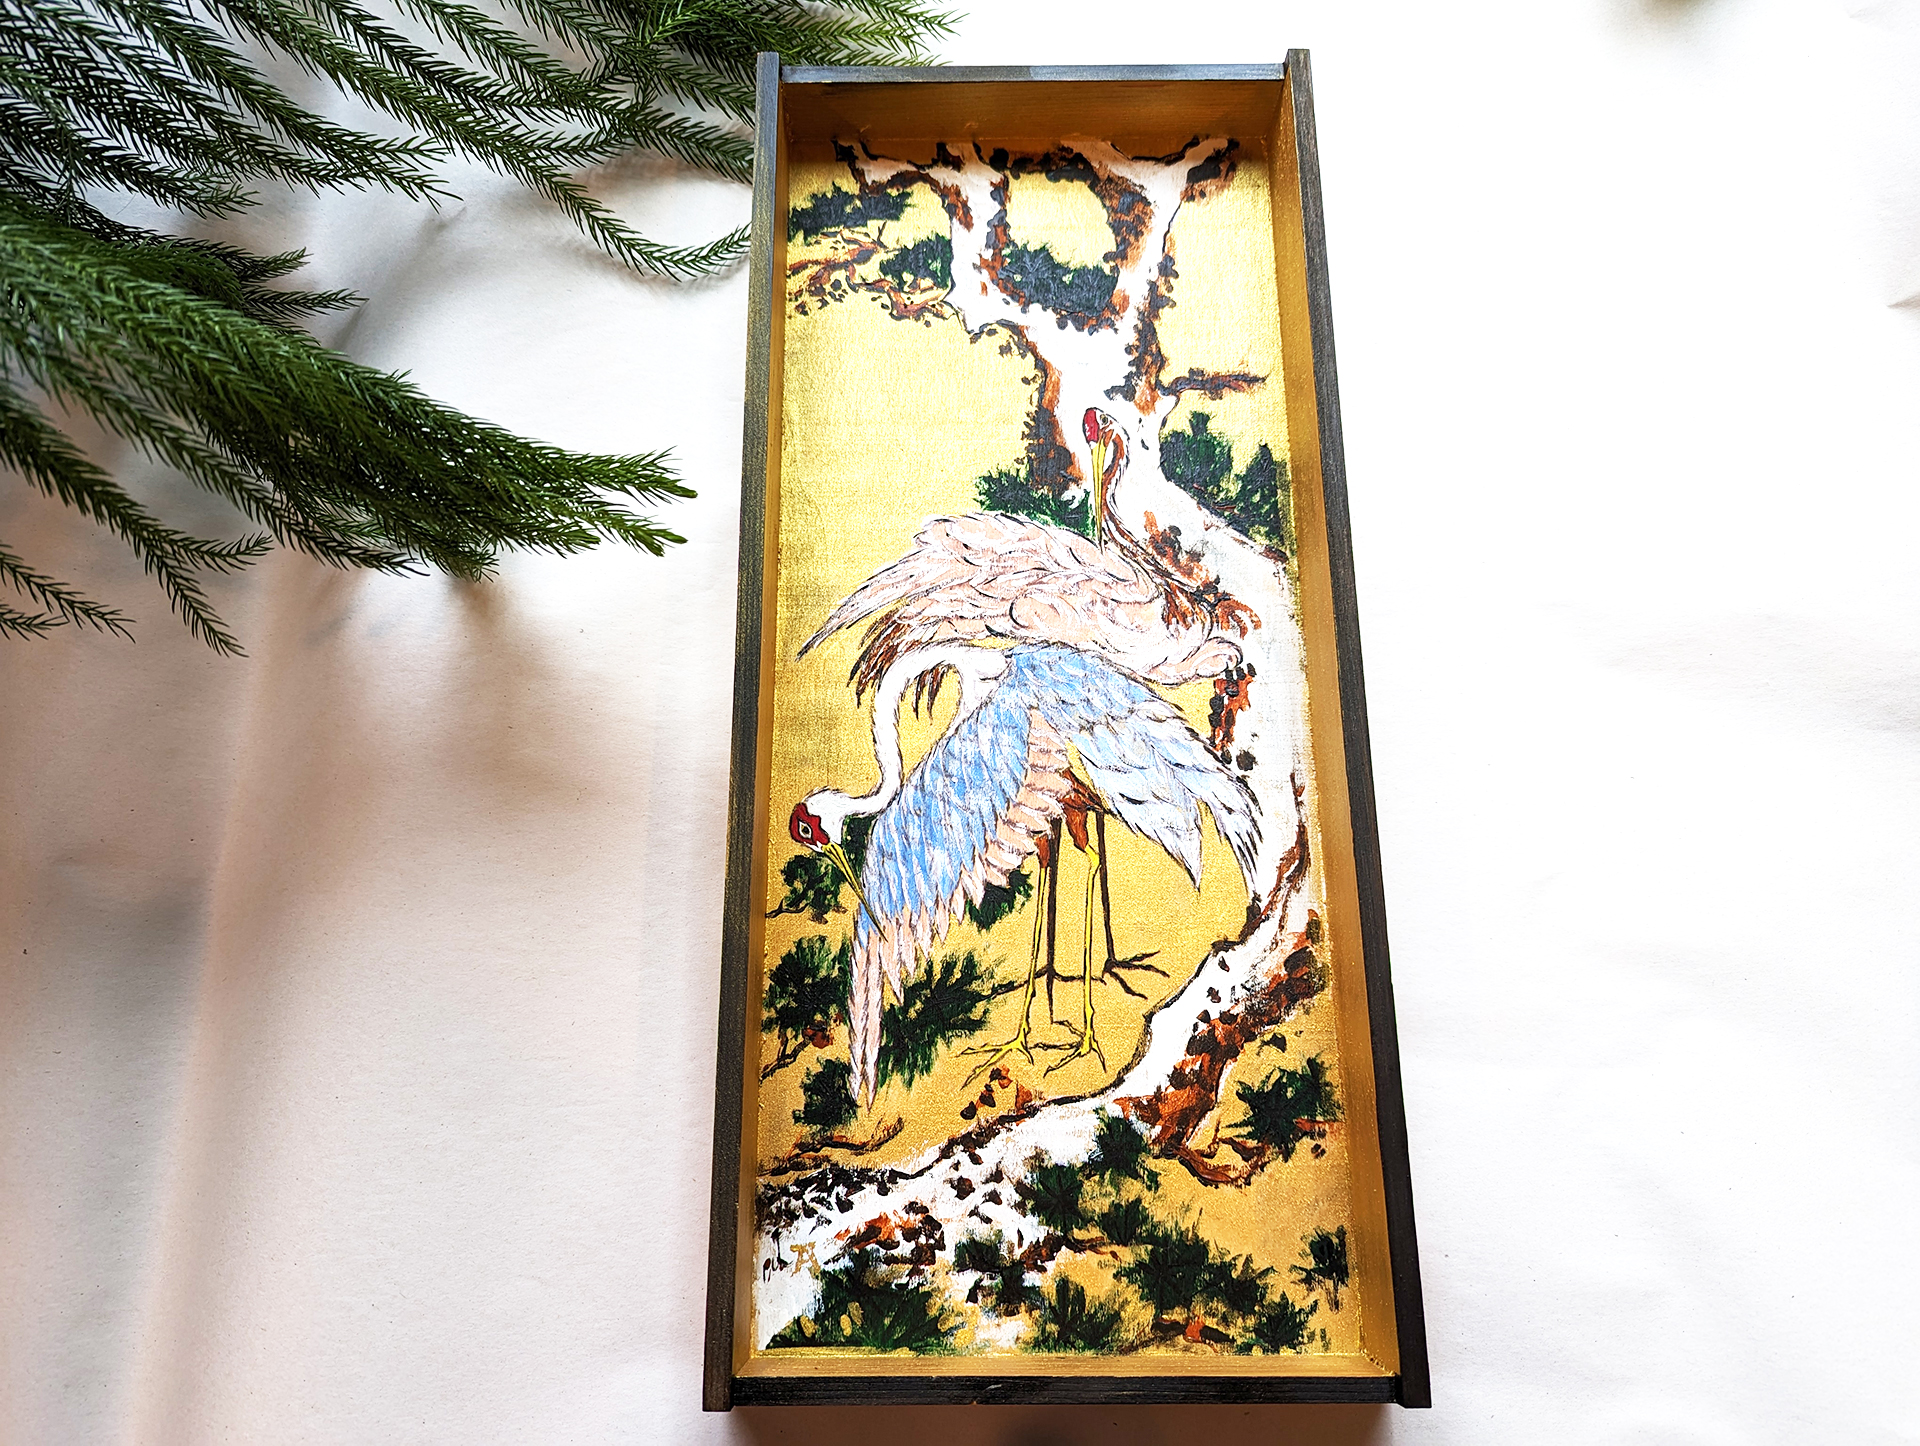 Cranes on Branch of Snow-covered Pine on a Wooden Box 